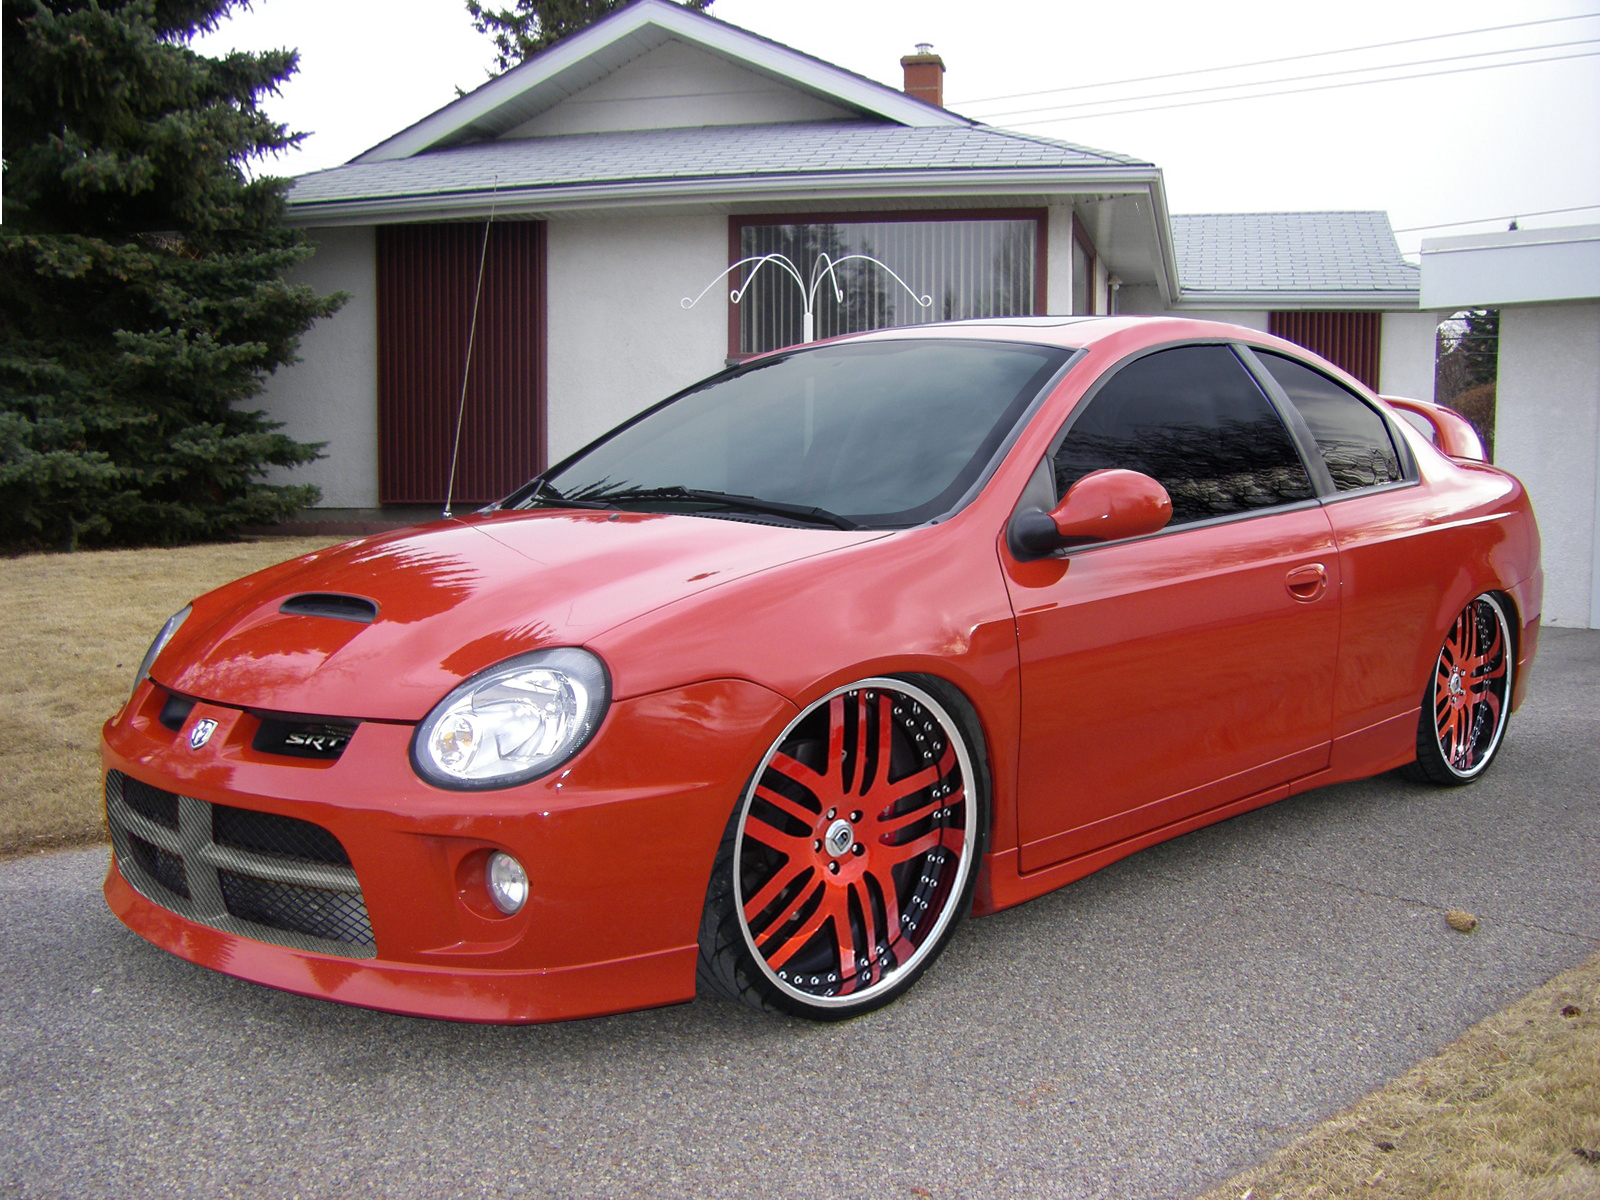 On this page we present you the most successful photo gallery of Dodge Neon